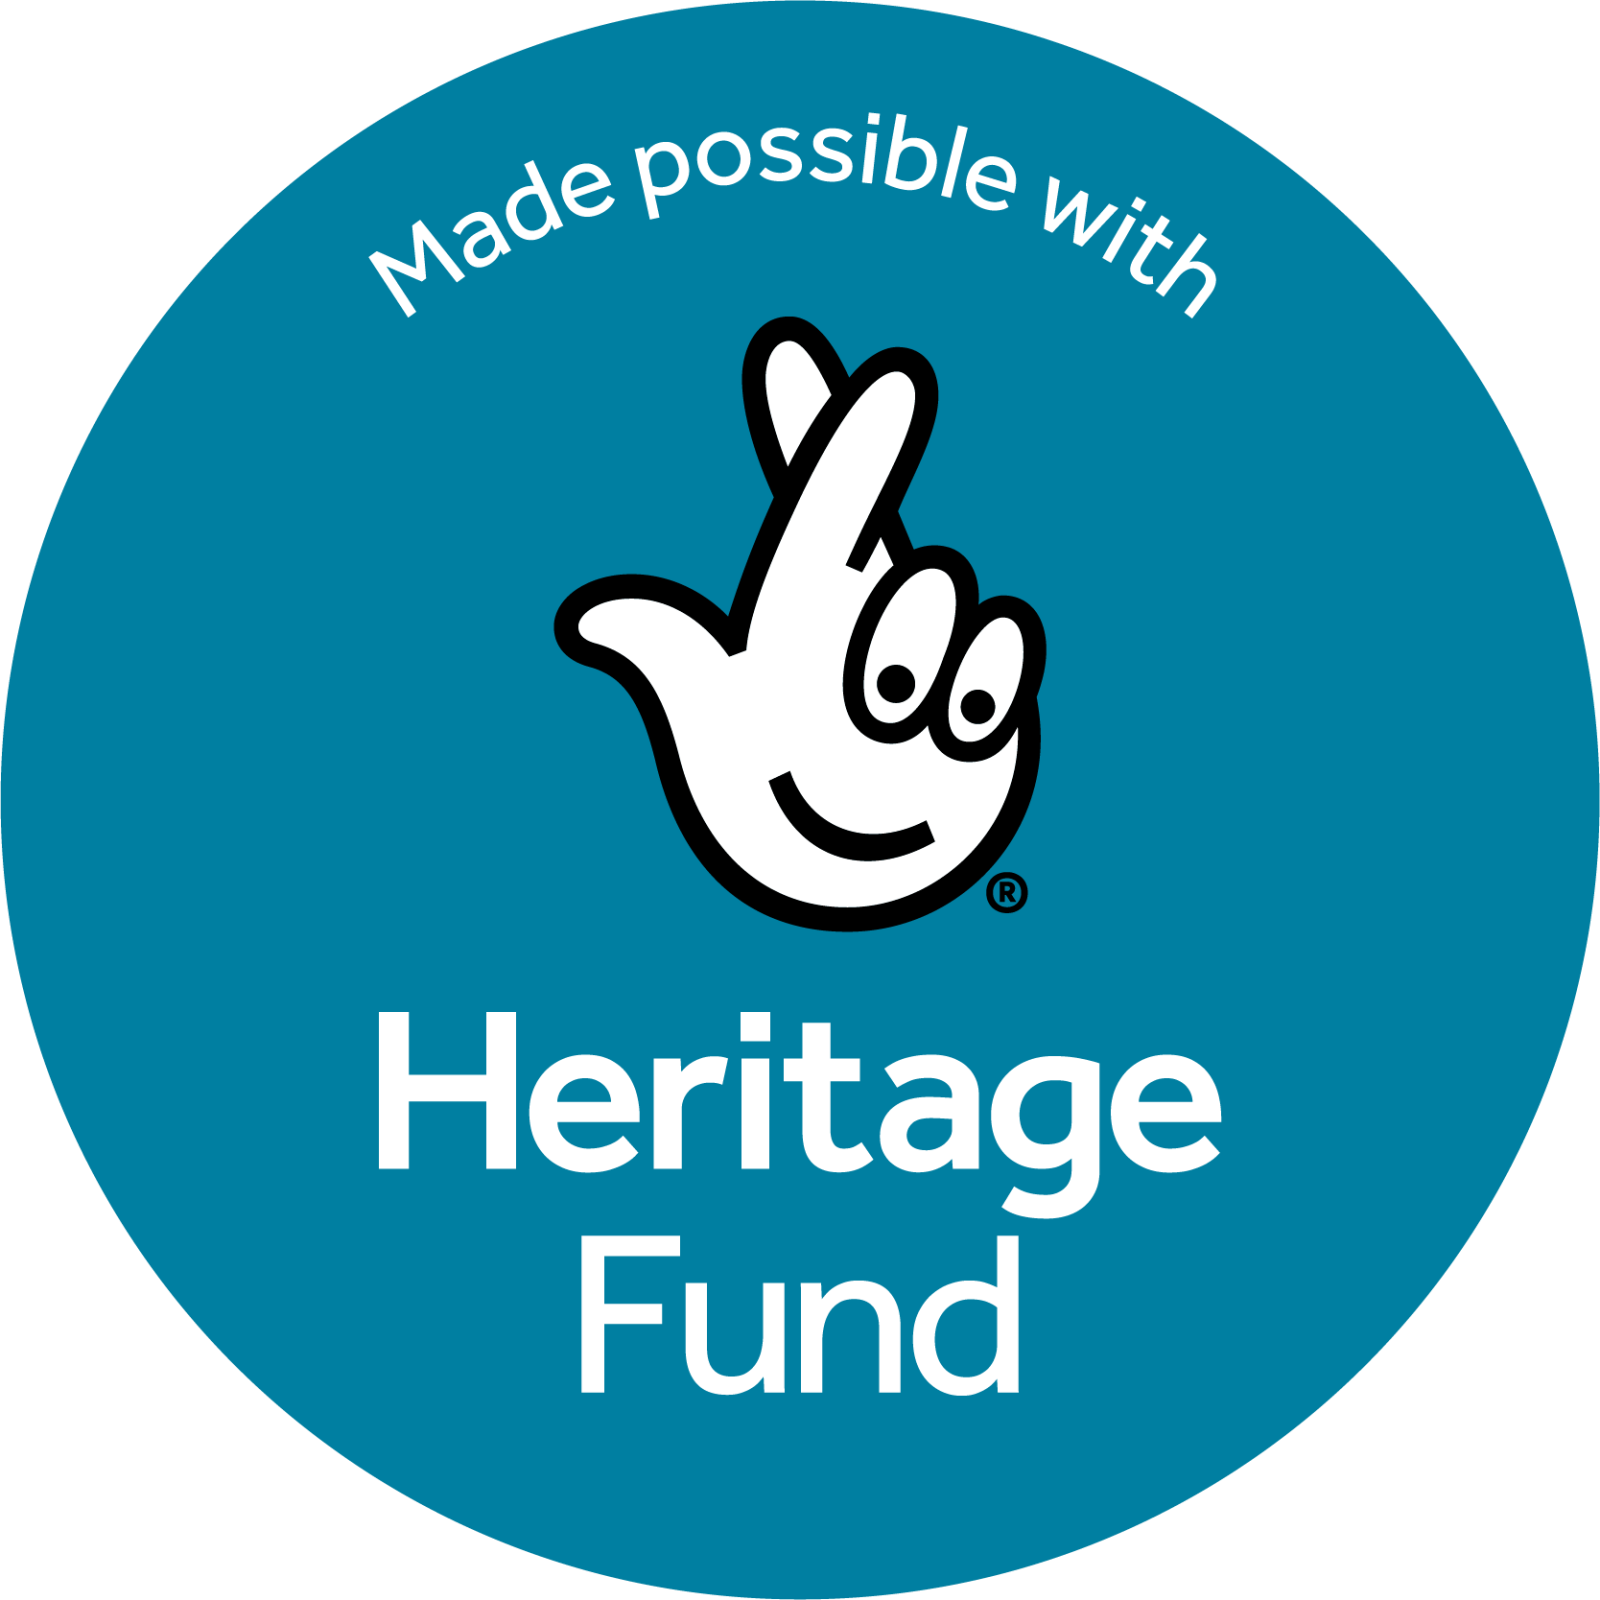 Made possible with Heritage Fund stamp